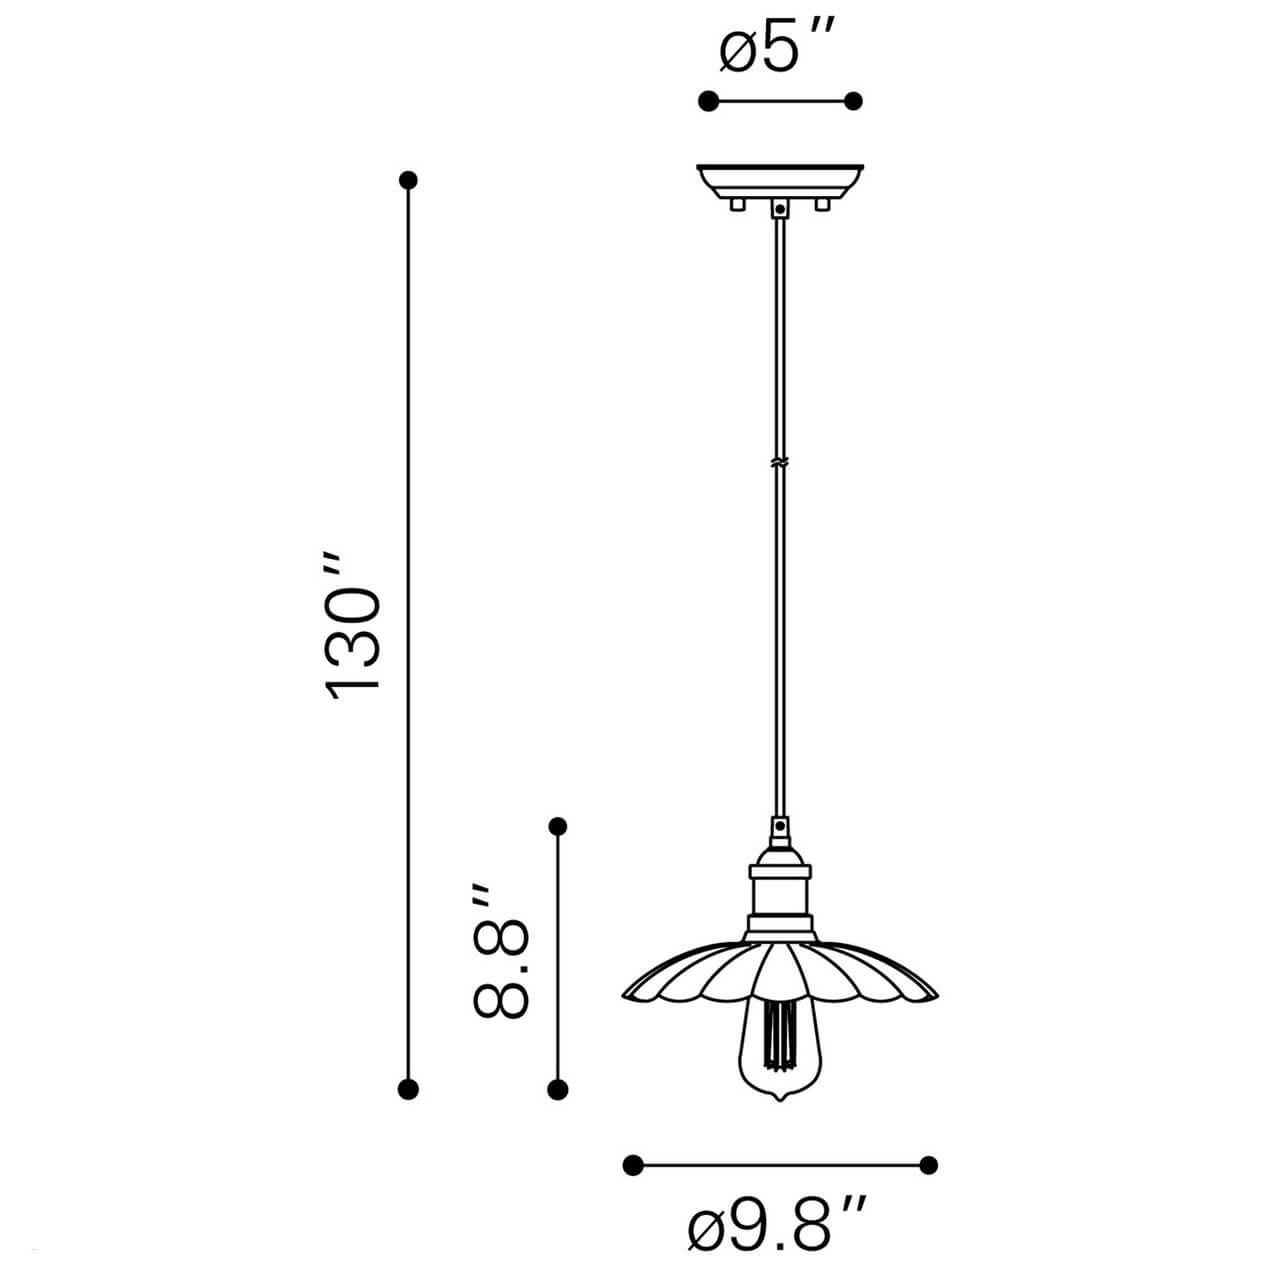 Outdoor pendant lighting dimensions view